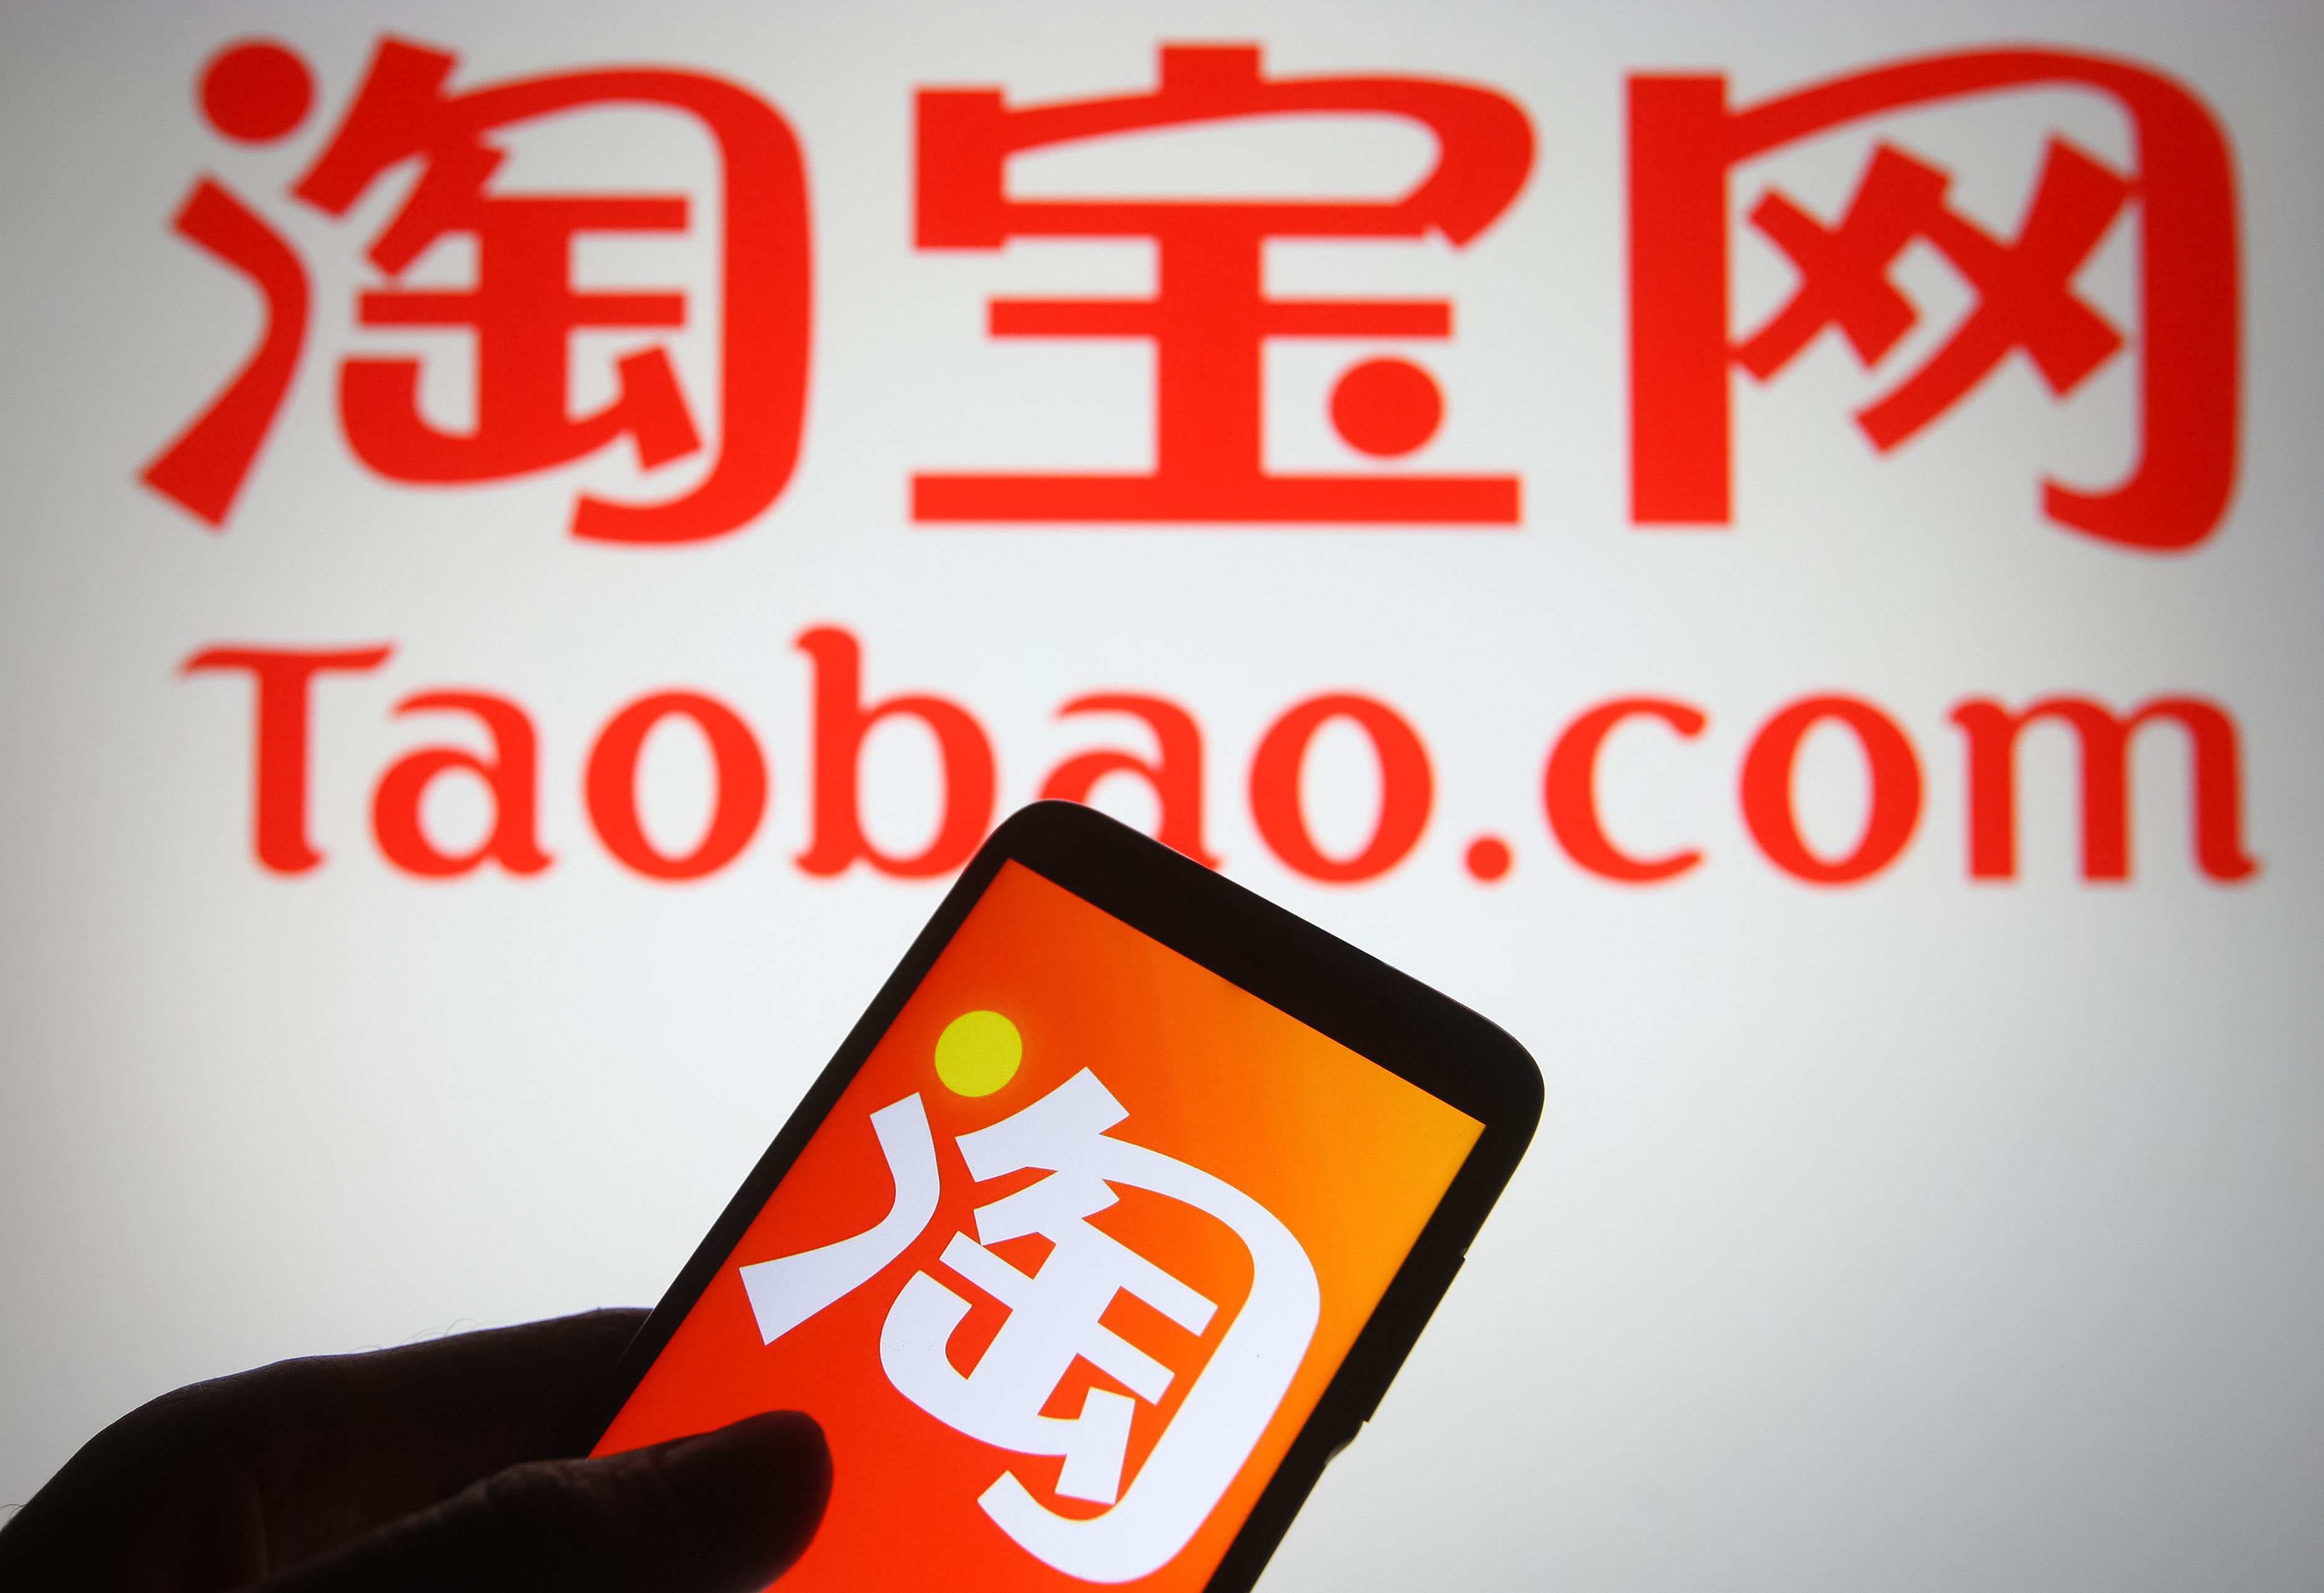 Launched in 2003, Taobao Marketplace provides consumers across China’s large cities and less-developed areas with an engaging, personalised shopping experience from small merchants. Photo: SOPA Images/LightRocket via Getty Images